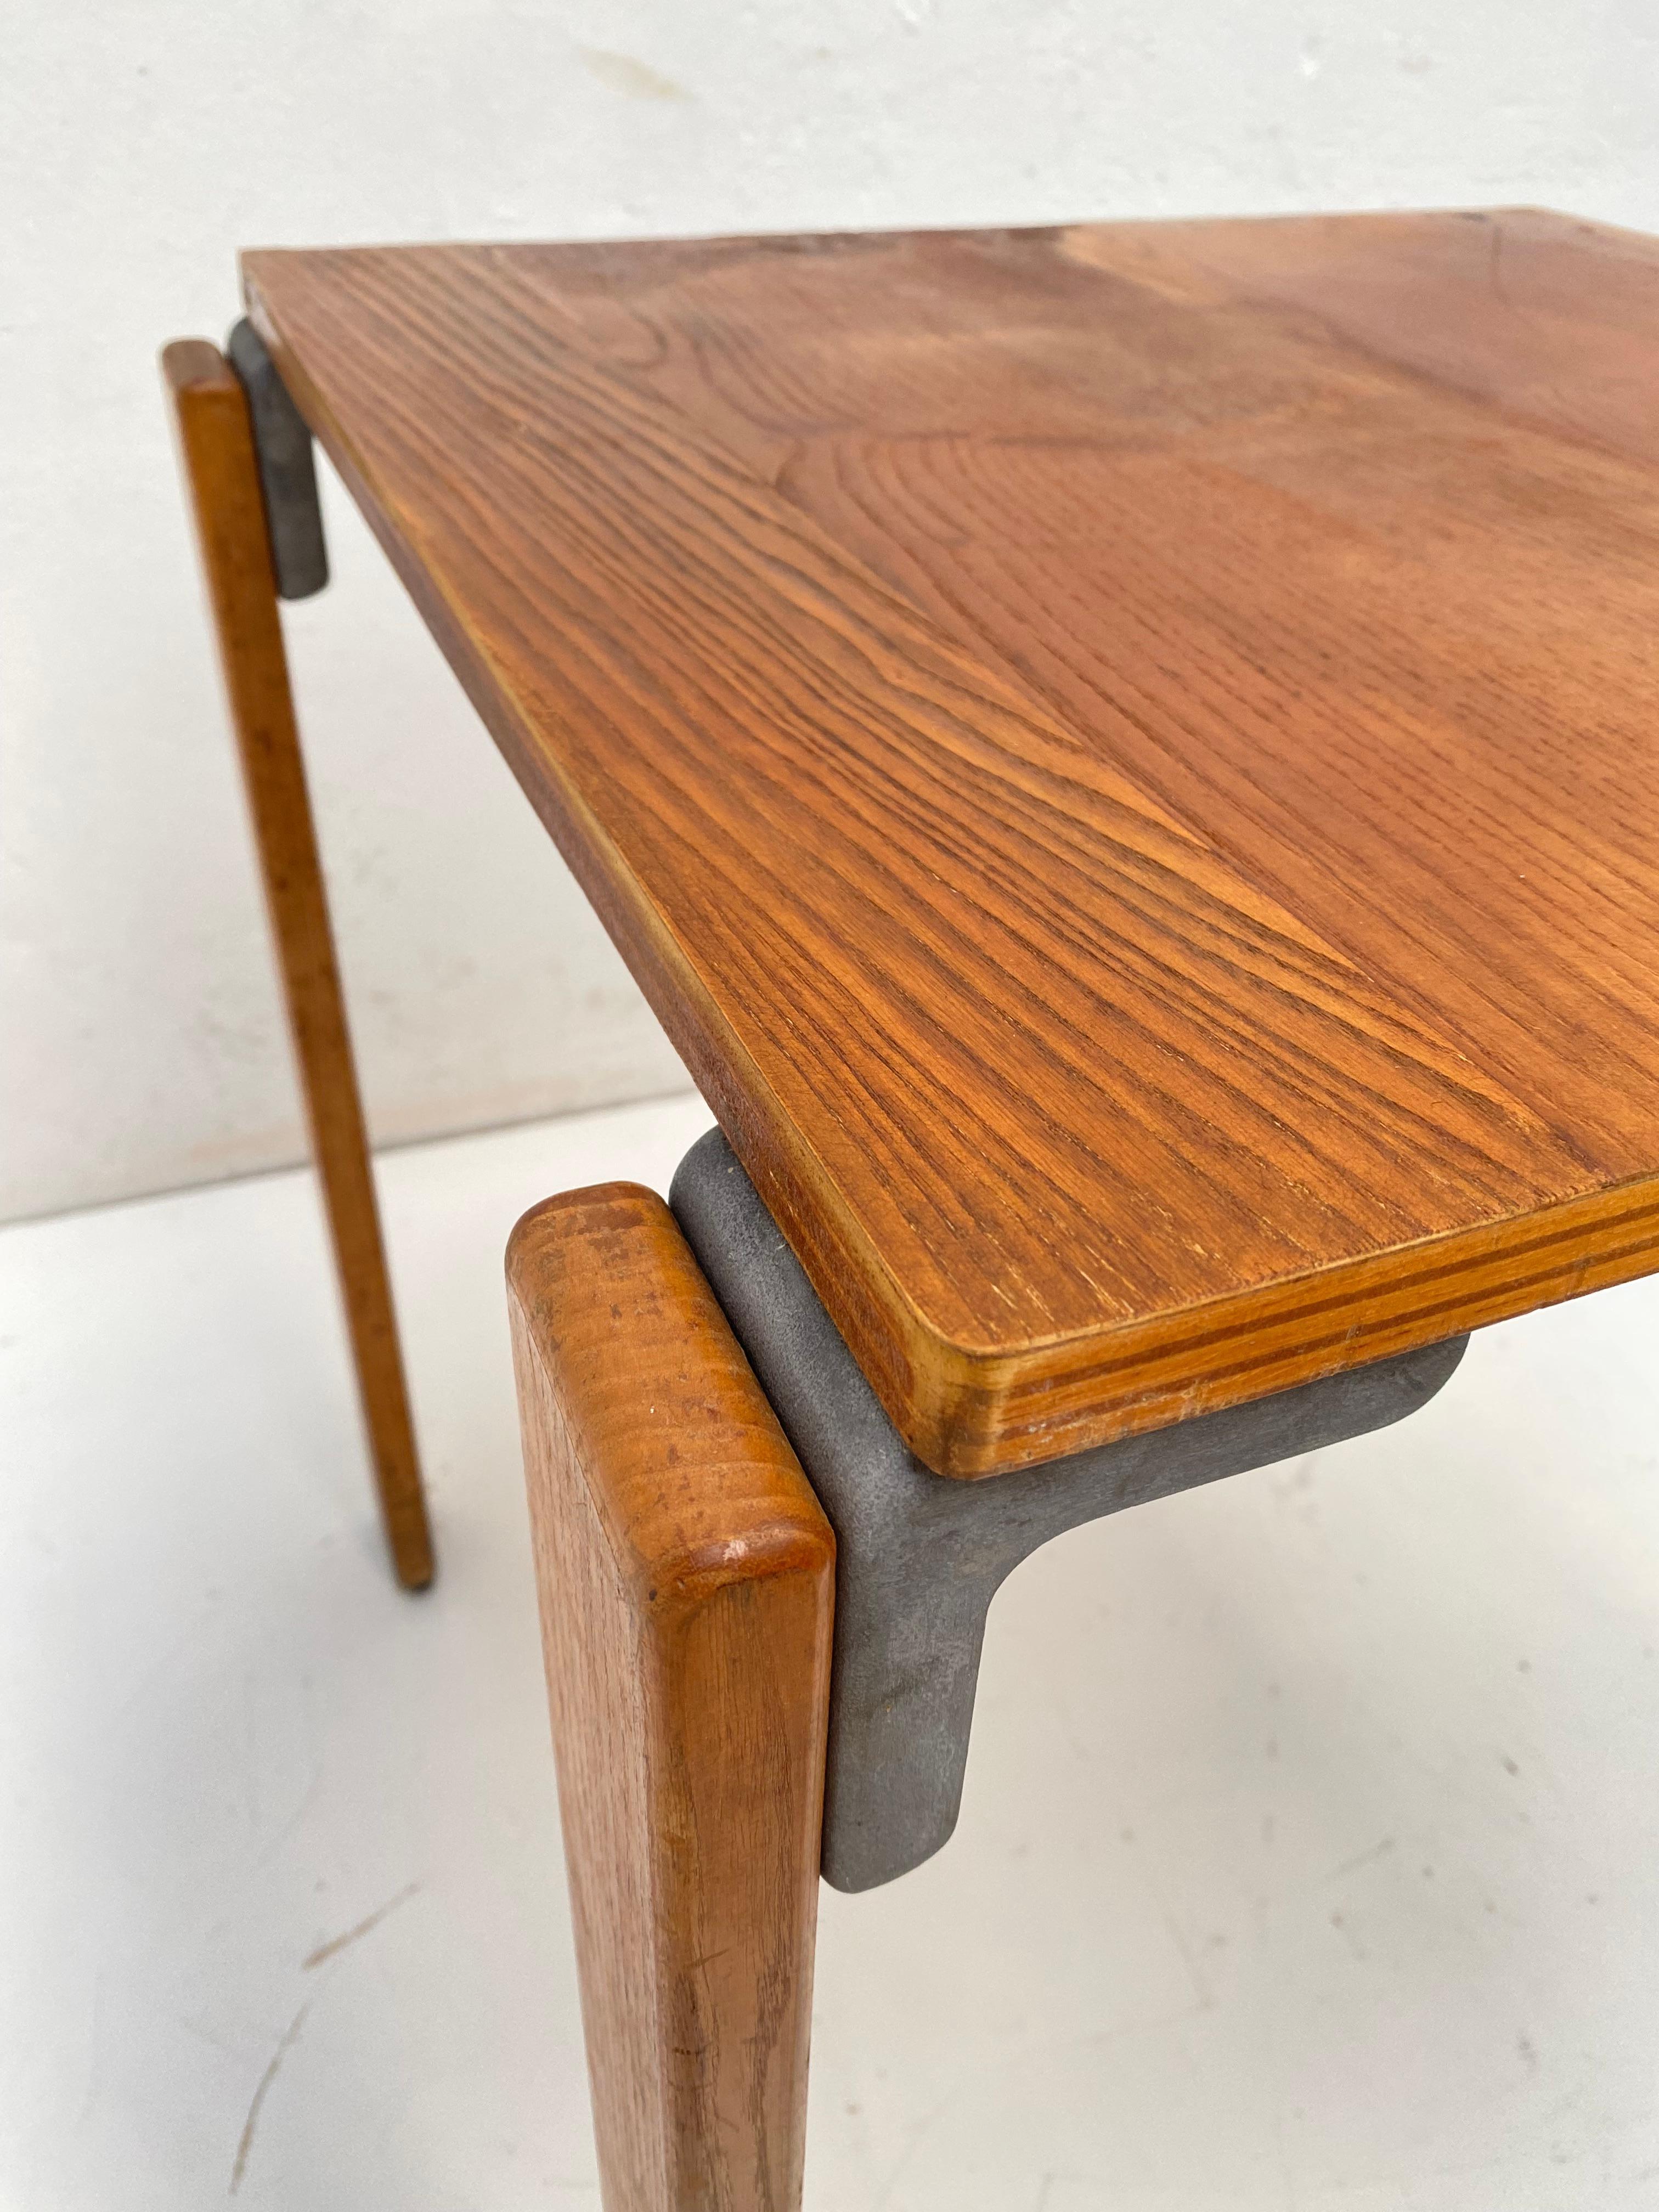 Very Rare George Candilis Dining Table  'Les Carrots' Port Leucate France 1968 For Sale 7